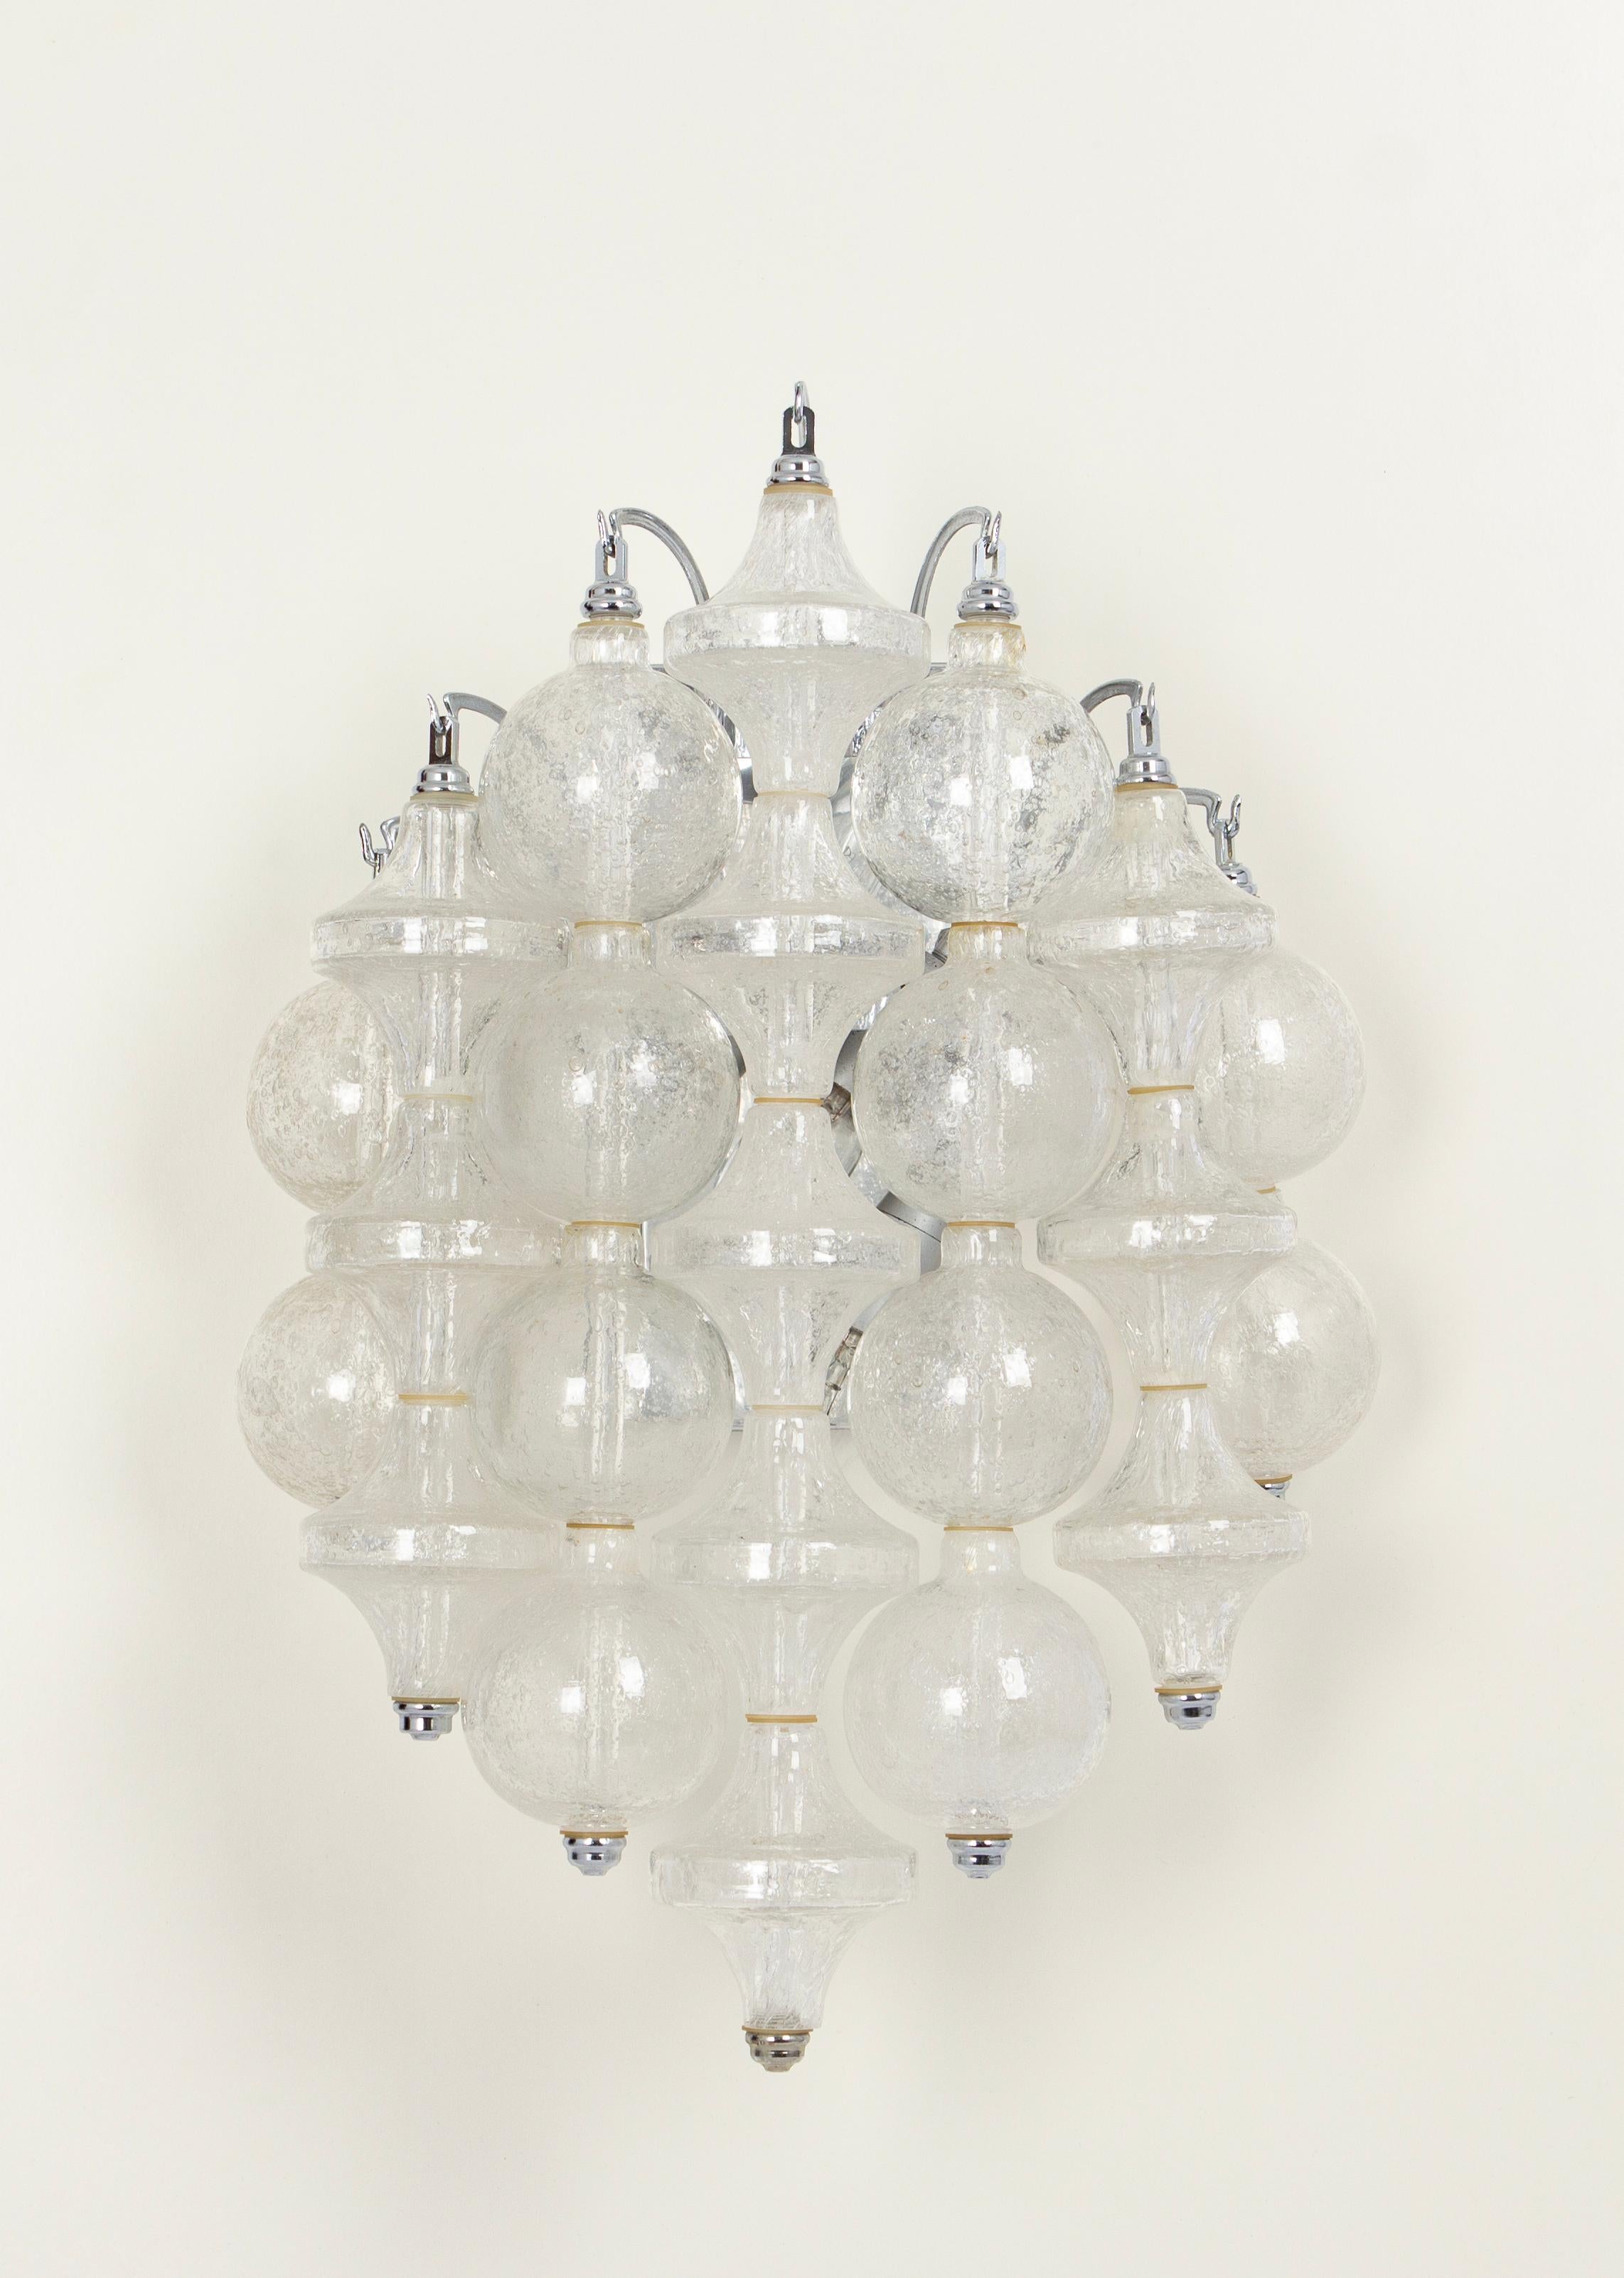 Wonderful pair of midcentury wall sconces, made by Kalmar, Austria, manufactured, circa 1970-1979.
Each tulip-shaped glass is handmade which makes each glass piece a unique piece. Each sconce is made of many glass pieces on a metal frame.

Heavy